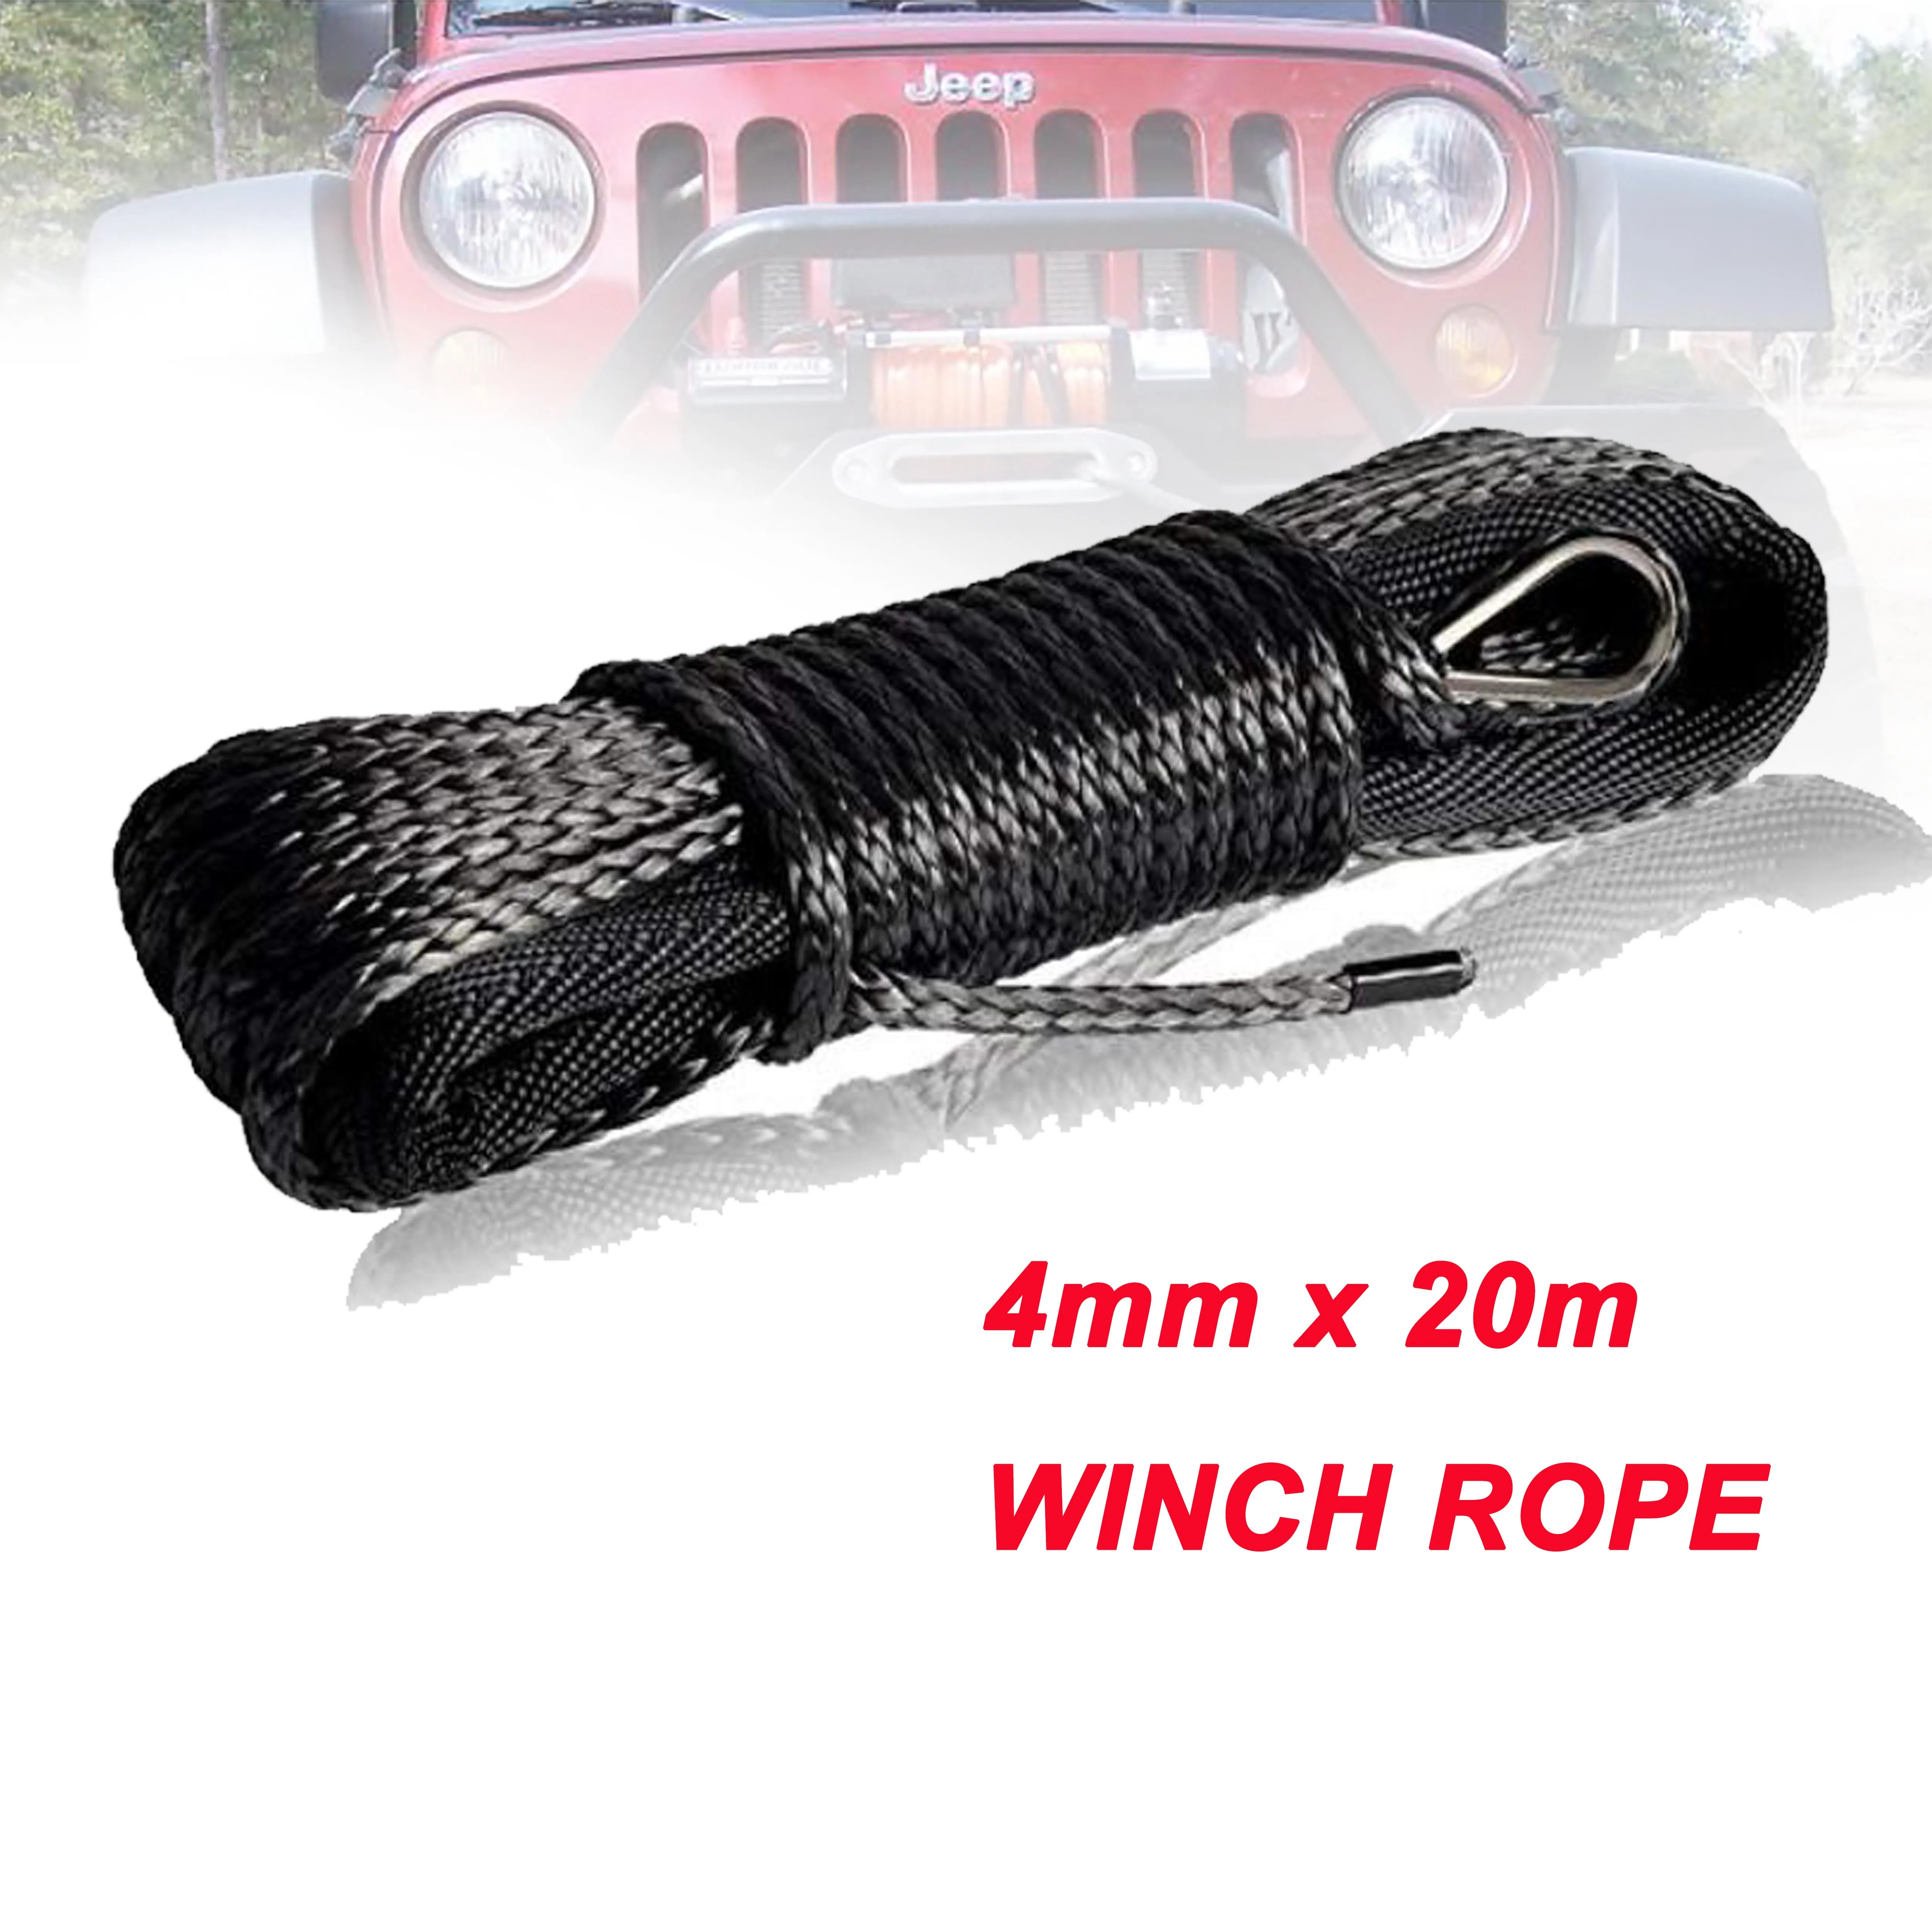 Winch rope usa 4mm x 20m Synthetic Winch Line Fiber Rope Towing Cable Car Accessories for 4X4/ATV/UTV/4WD/OFF-ROAD Color Name : Blue 